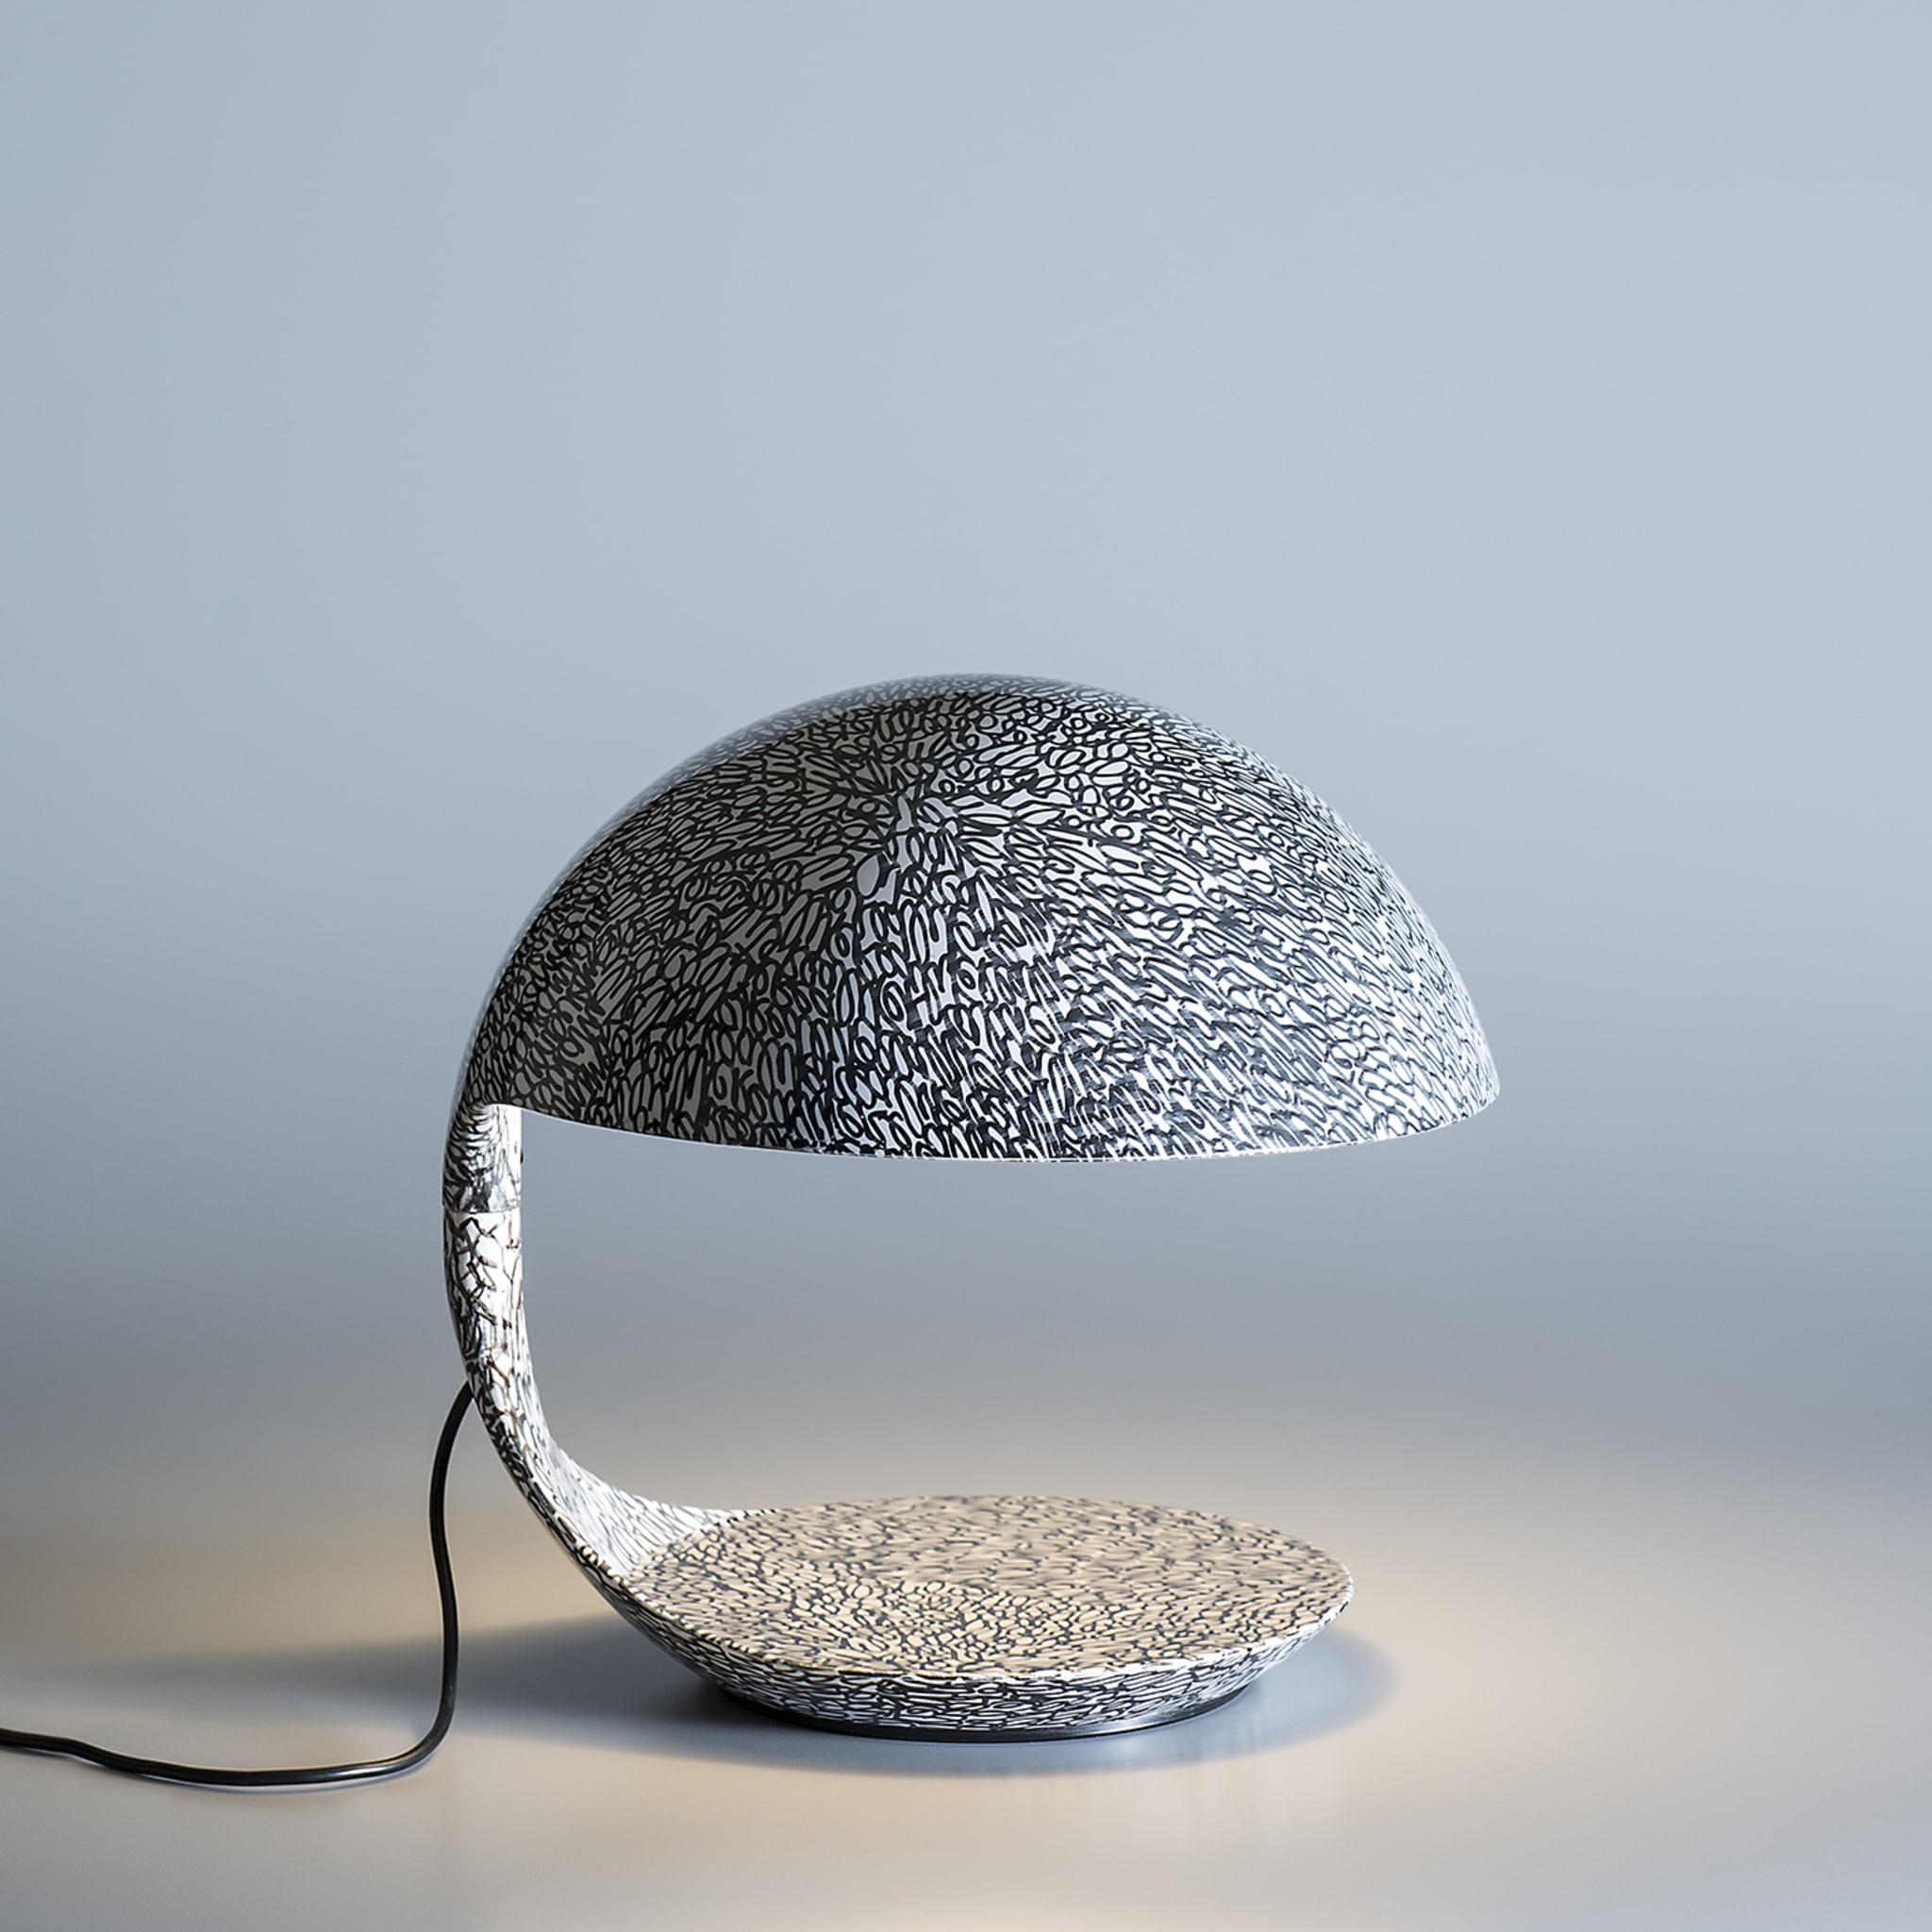 Cobra Texture Black-And-White Table Lamp by A. Femia & A. Simony - Alternative view 5